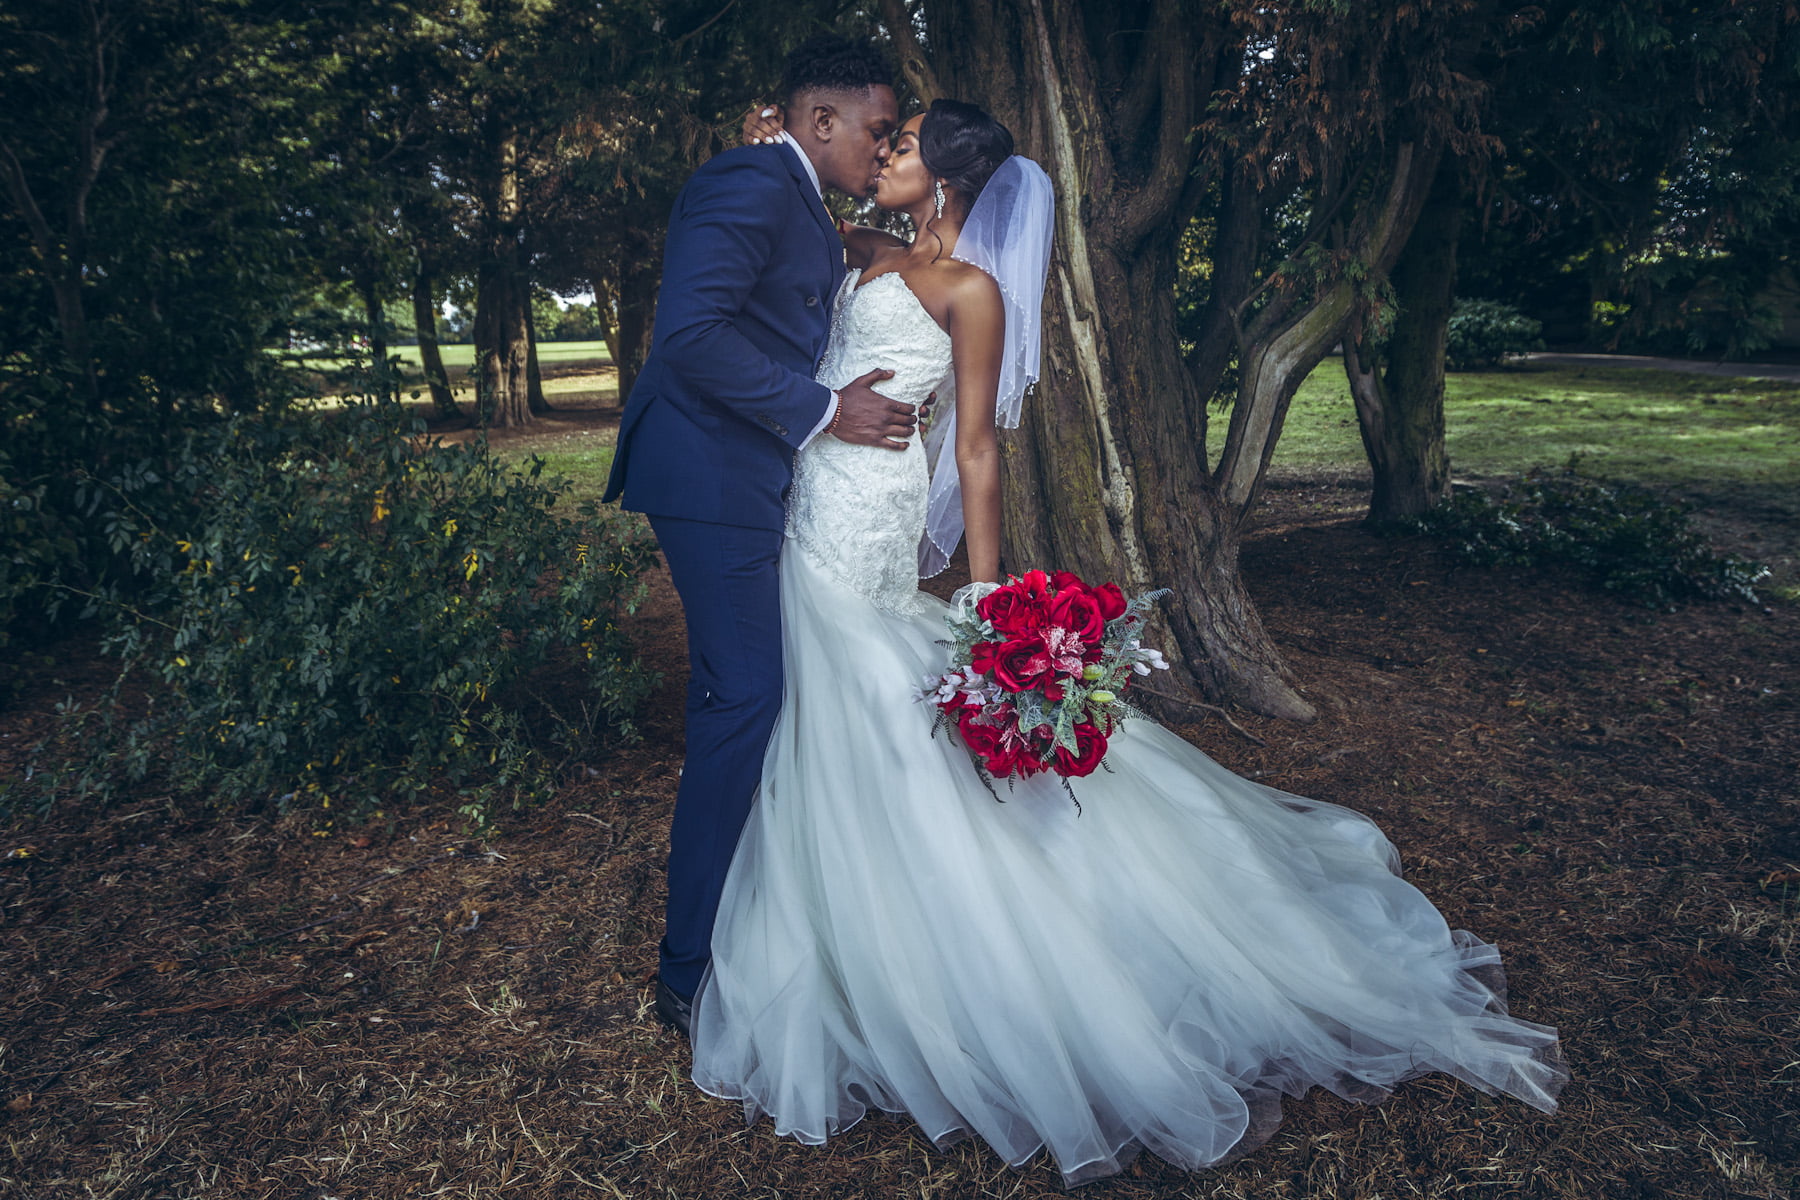 What a romantic kissing during couple photoshoot with stylish British Nigerian bride and groom